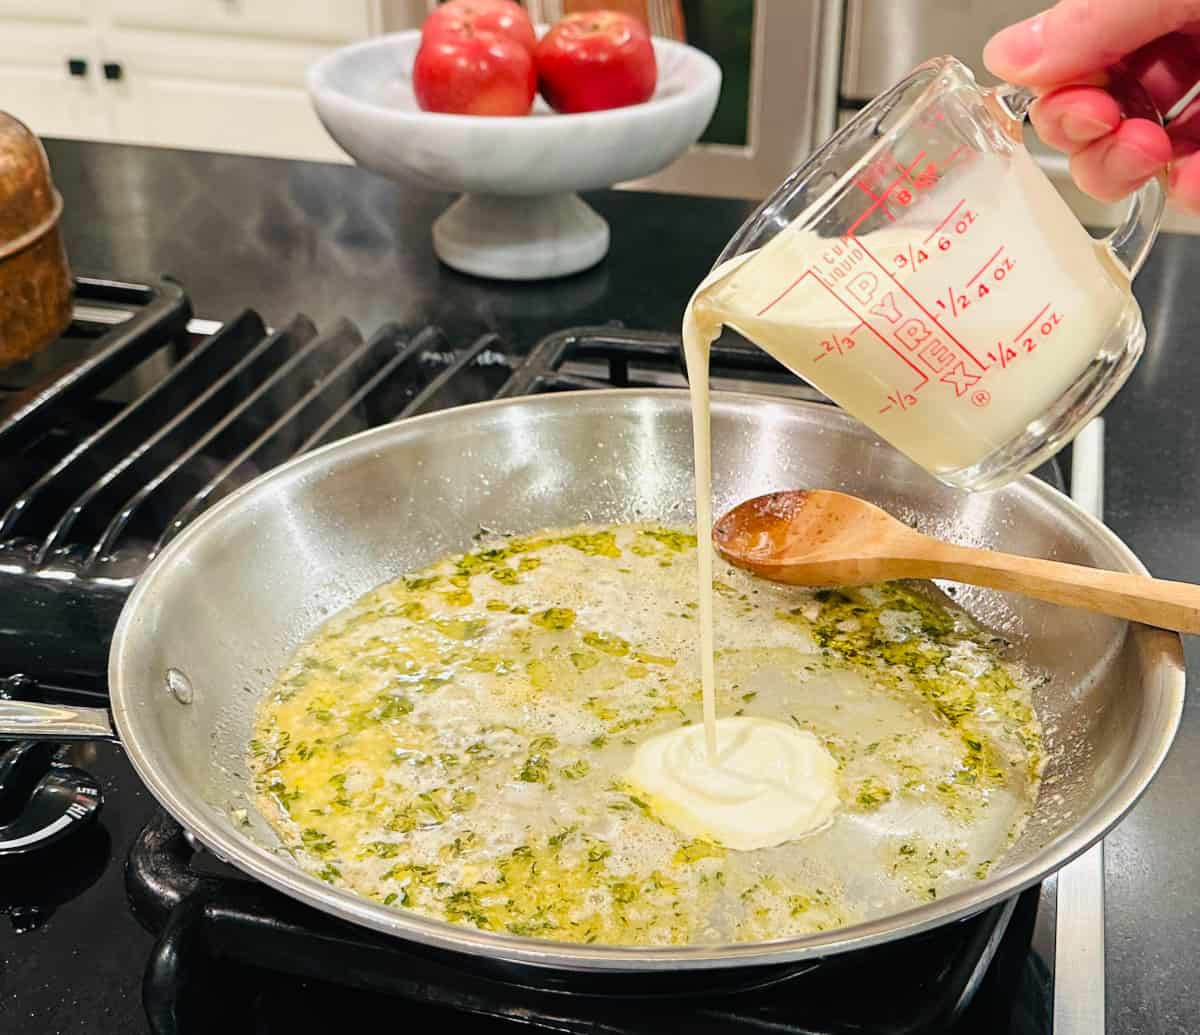 Cream being poured from a glass measuring cup into a large steel skillet containing white wine, melted butter, thyme, and garlic along with a wooden spoon.